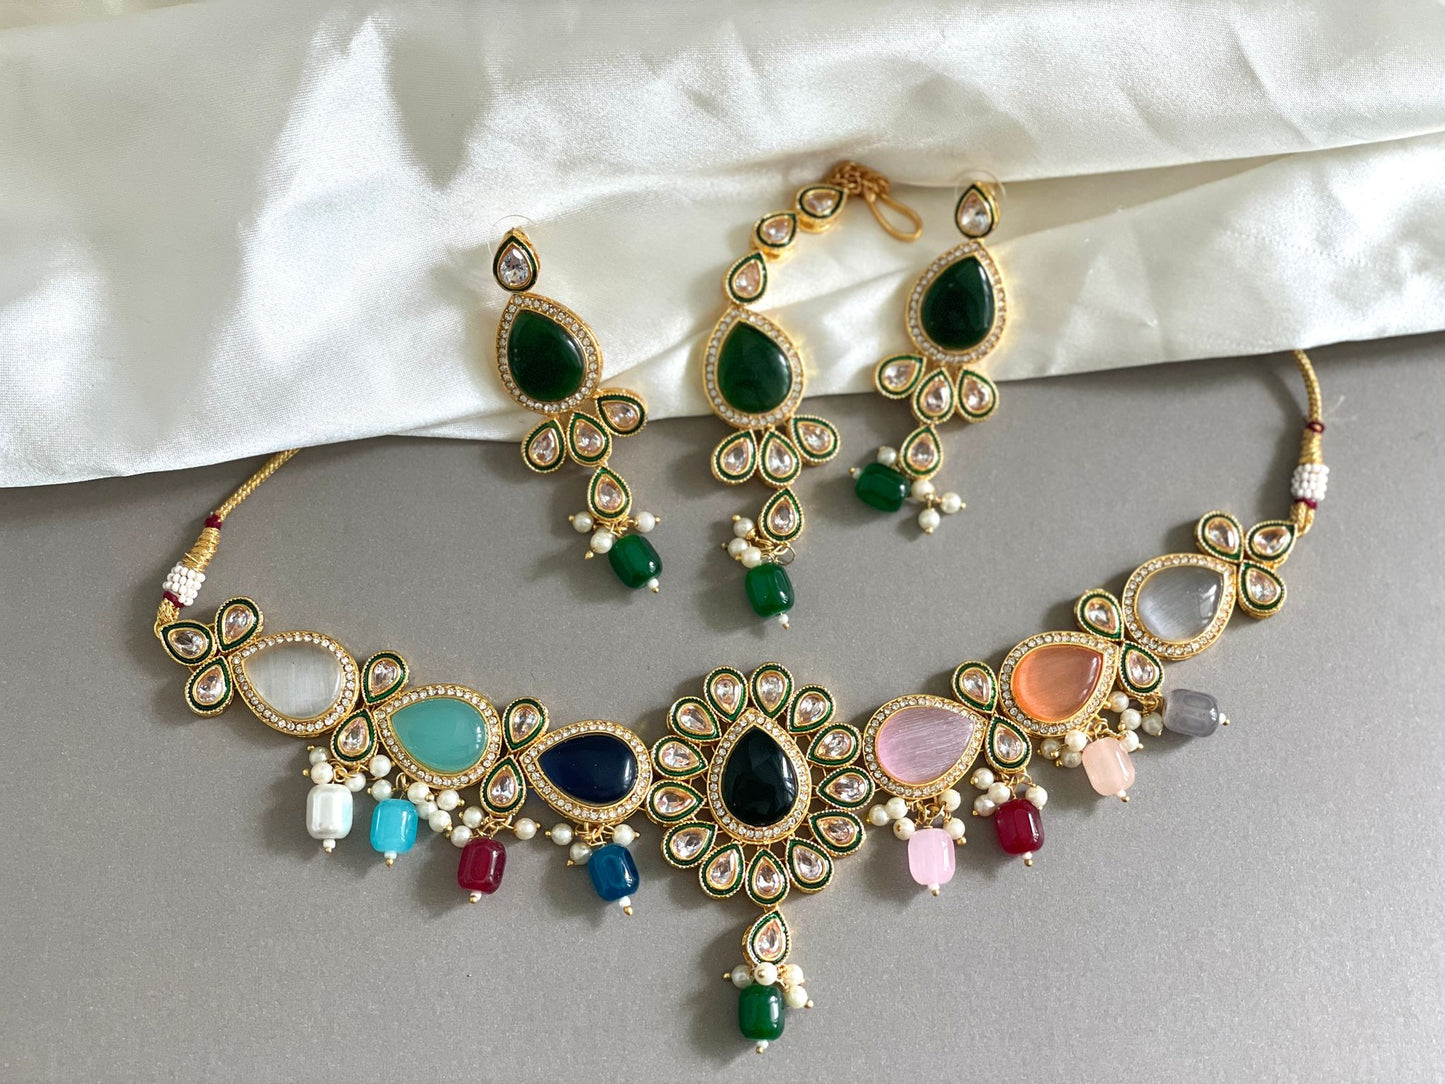 One necklace and two green earrings placed on a white sheet